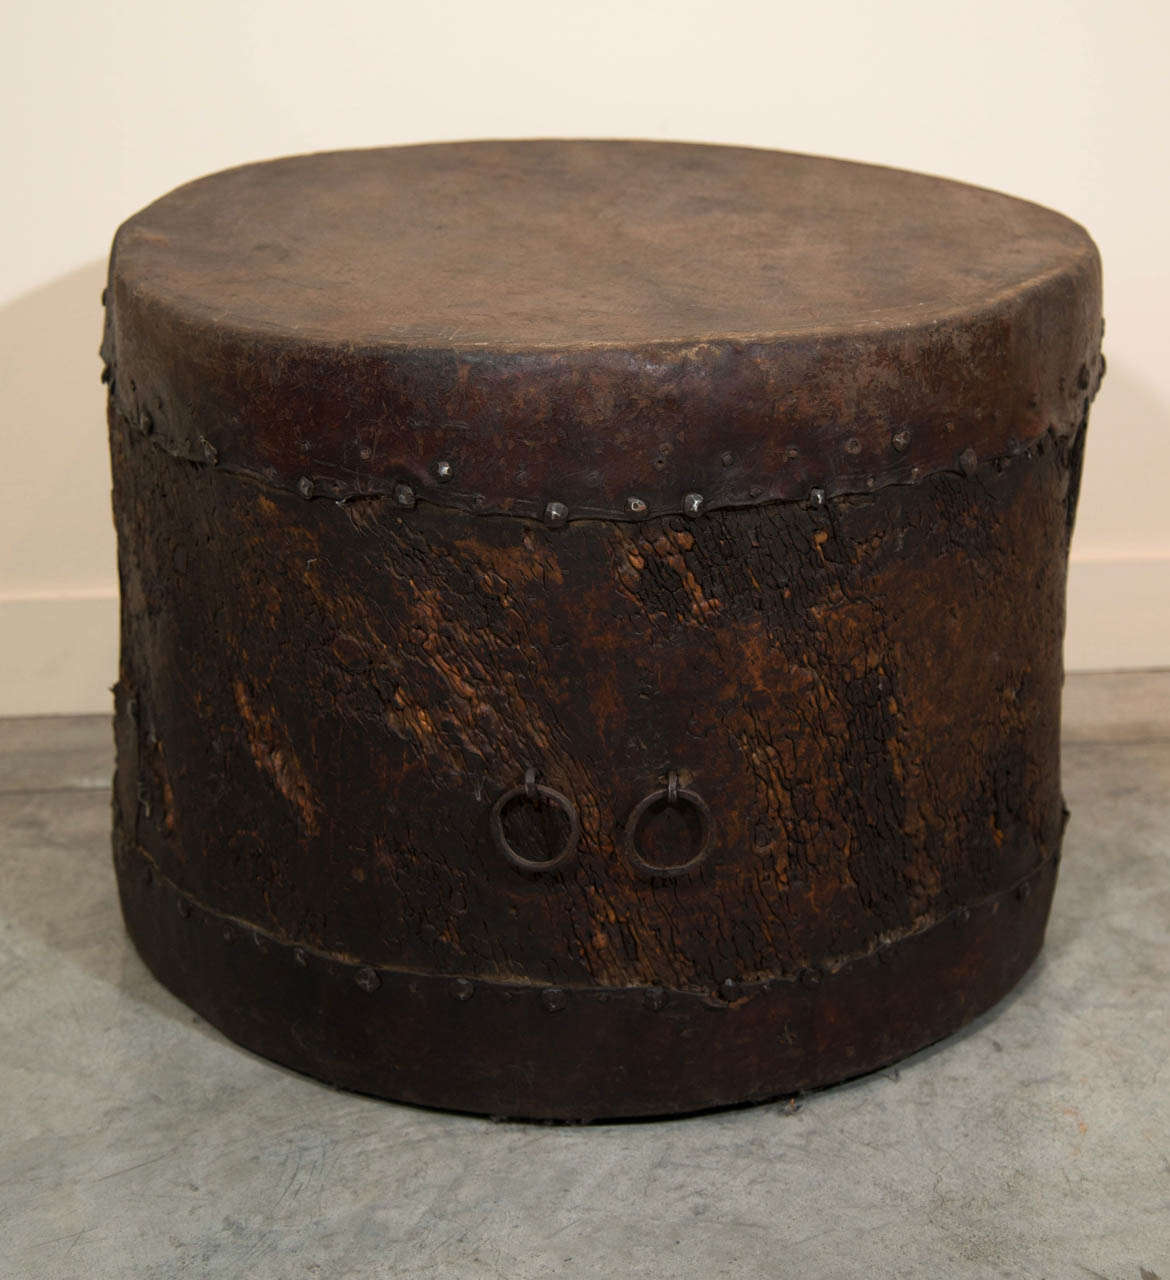 A fabulously worn antique poplar wood drum with original skin and slightly irregular shape. This piece would make a wonderful side or coffee table.
From Gansu Province, c.1880.
M907